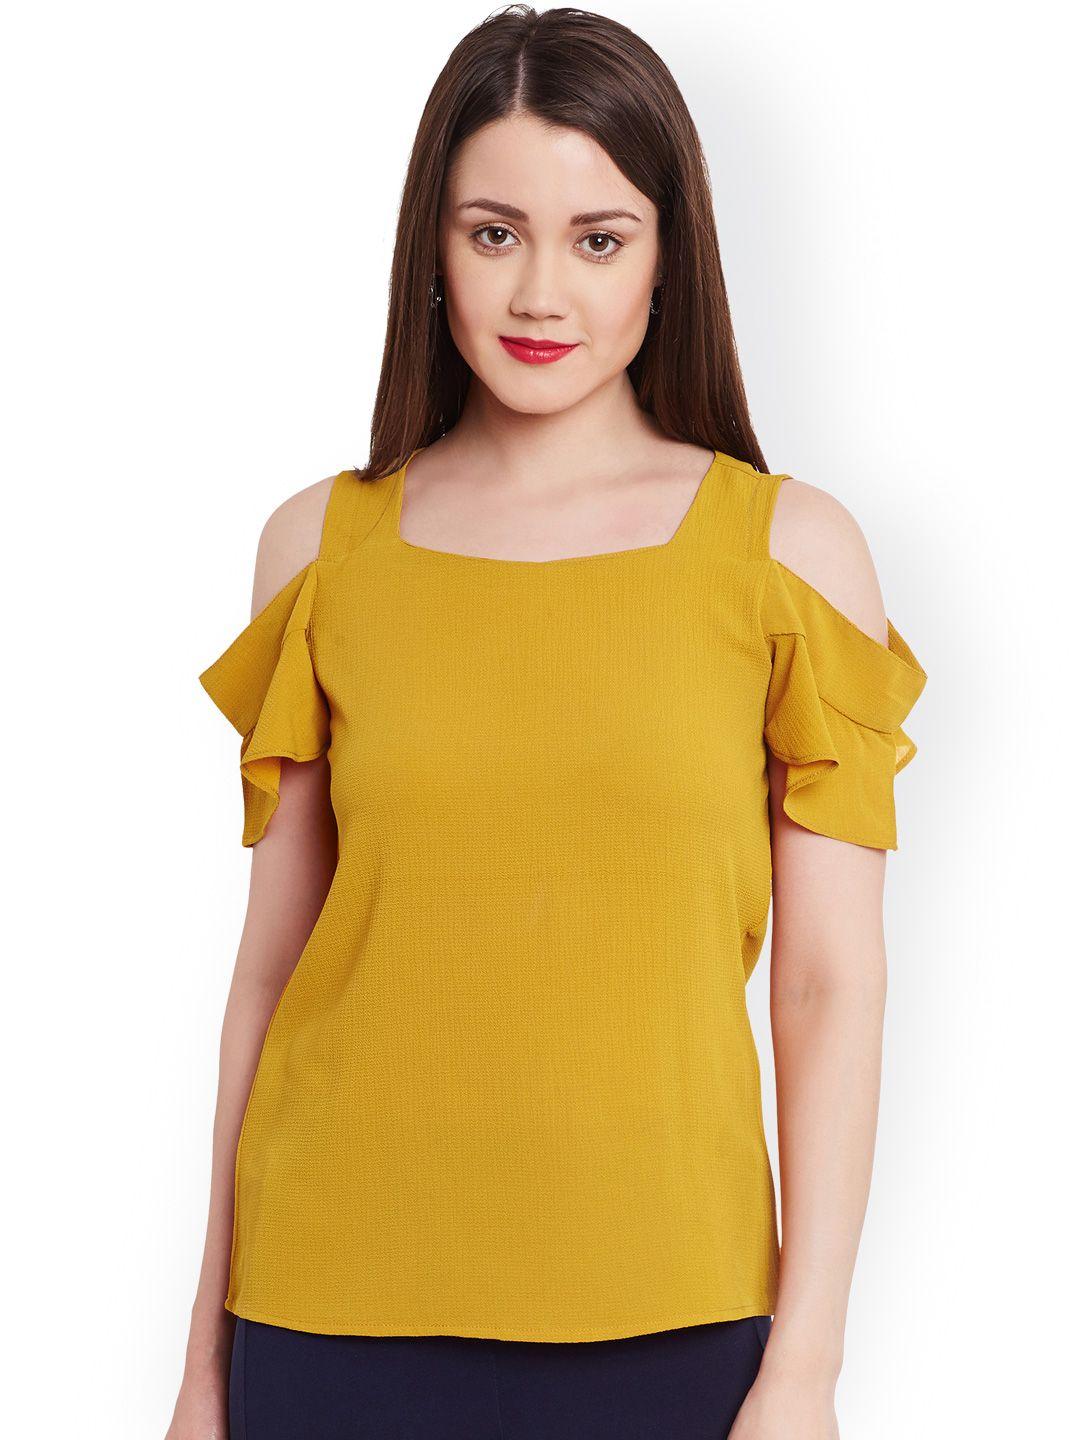 pannkh mustard yellow cold shoulder top